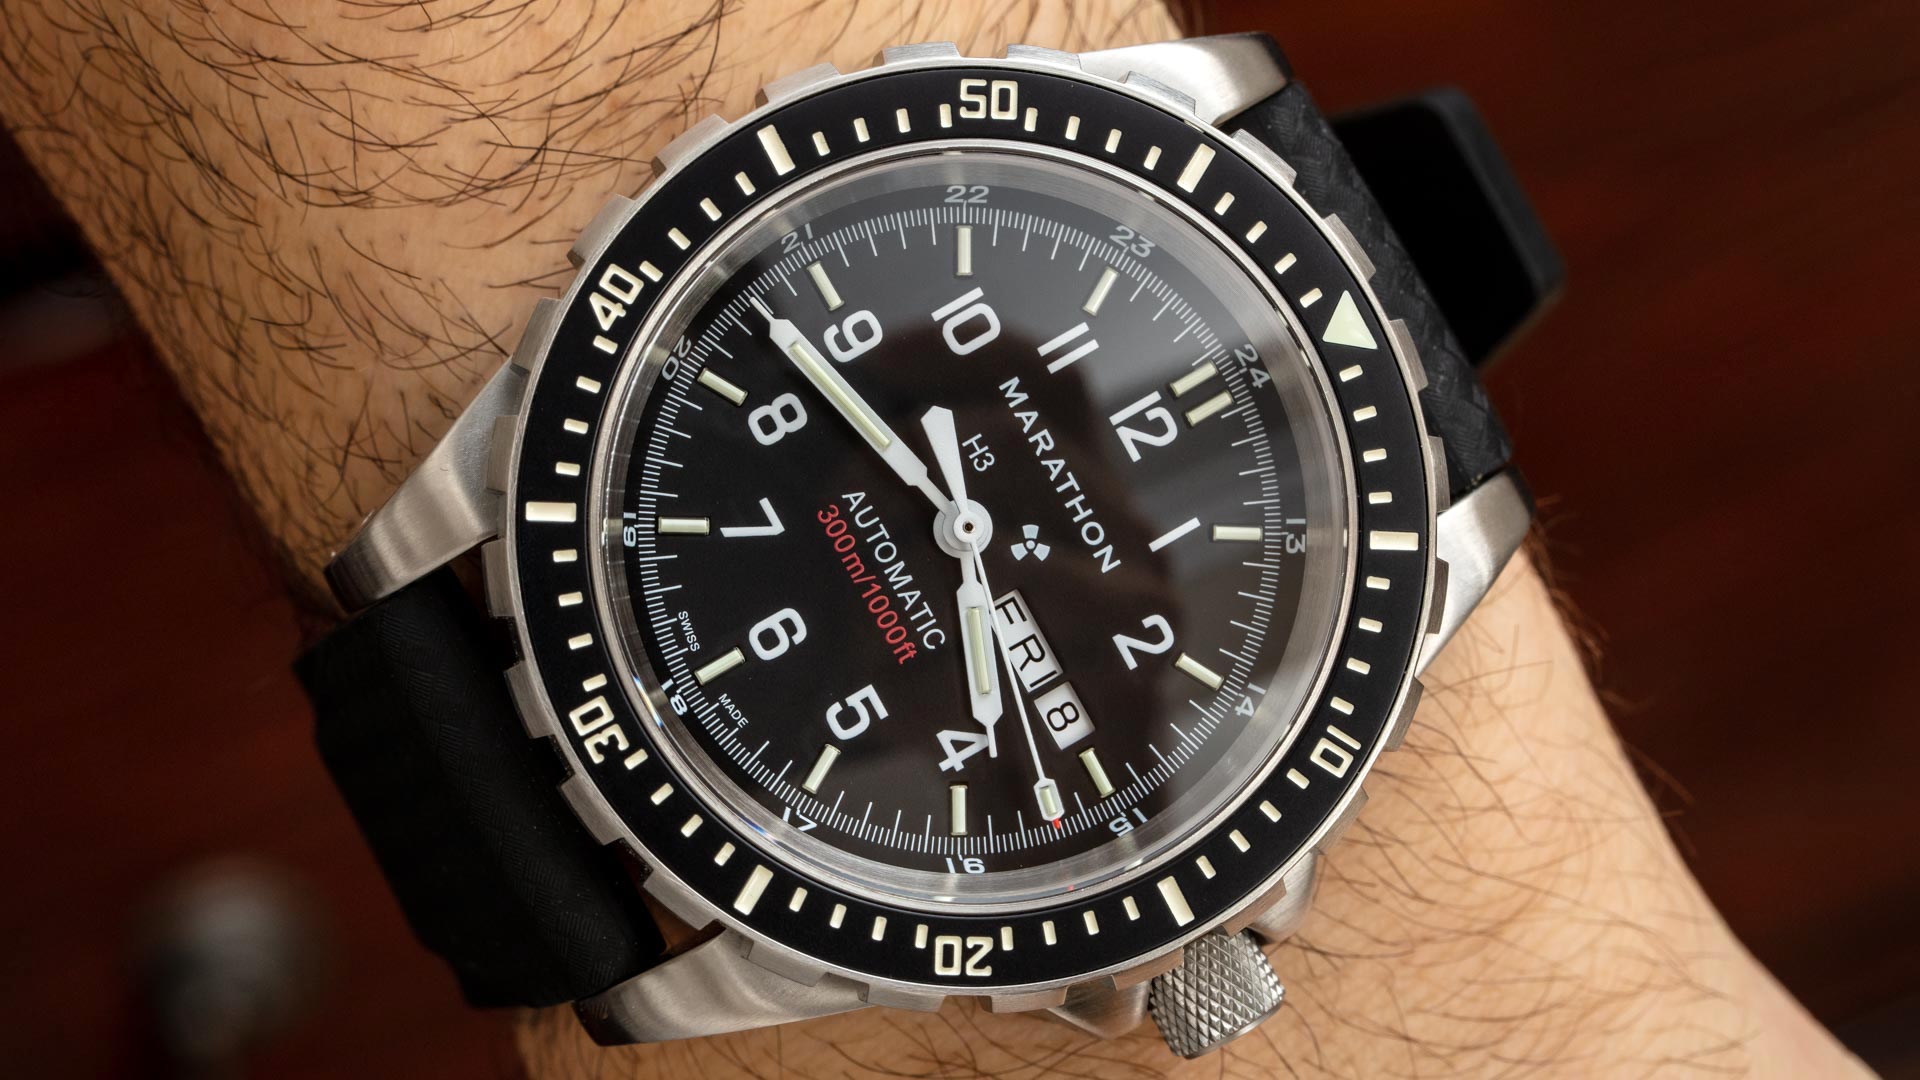 Marathon Search & Rescue 46mm JDD Jumbo Diver’s Automatic Watch Hands-On